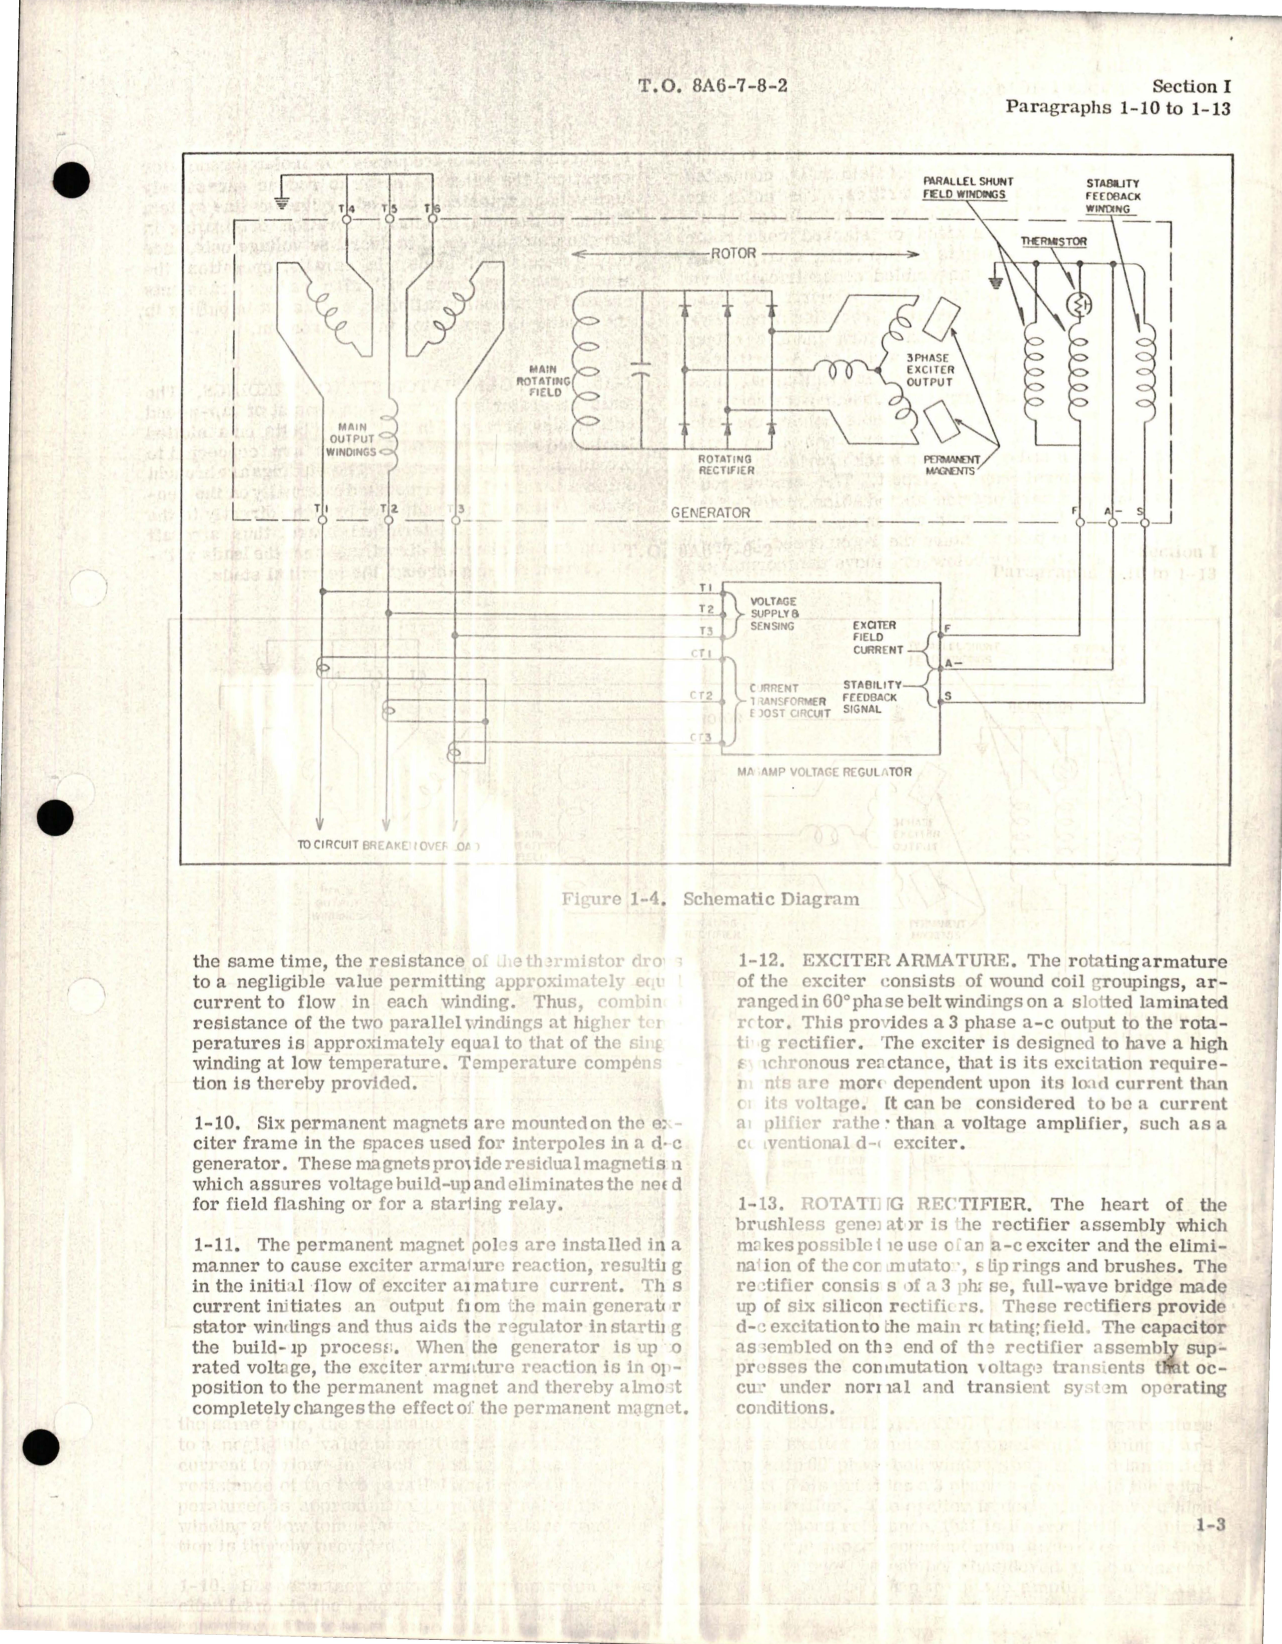 Sample page 7 from AirCorps Library document: Field Maintenance Instructions for A-C Generator - Parts 976J012-3, 976J119-7, 976J119-8, and 976J128-1 